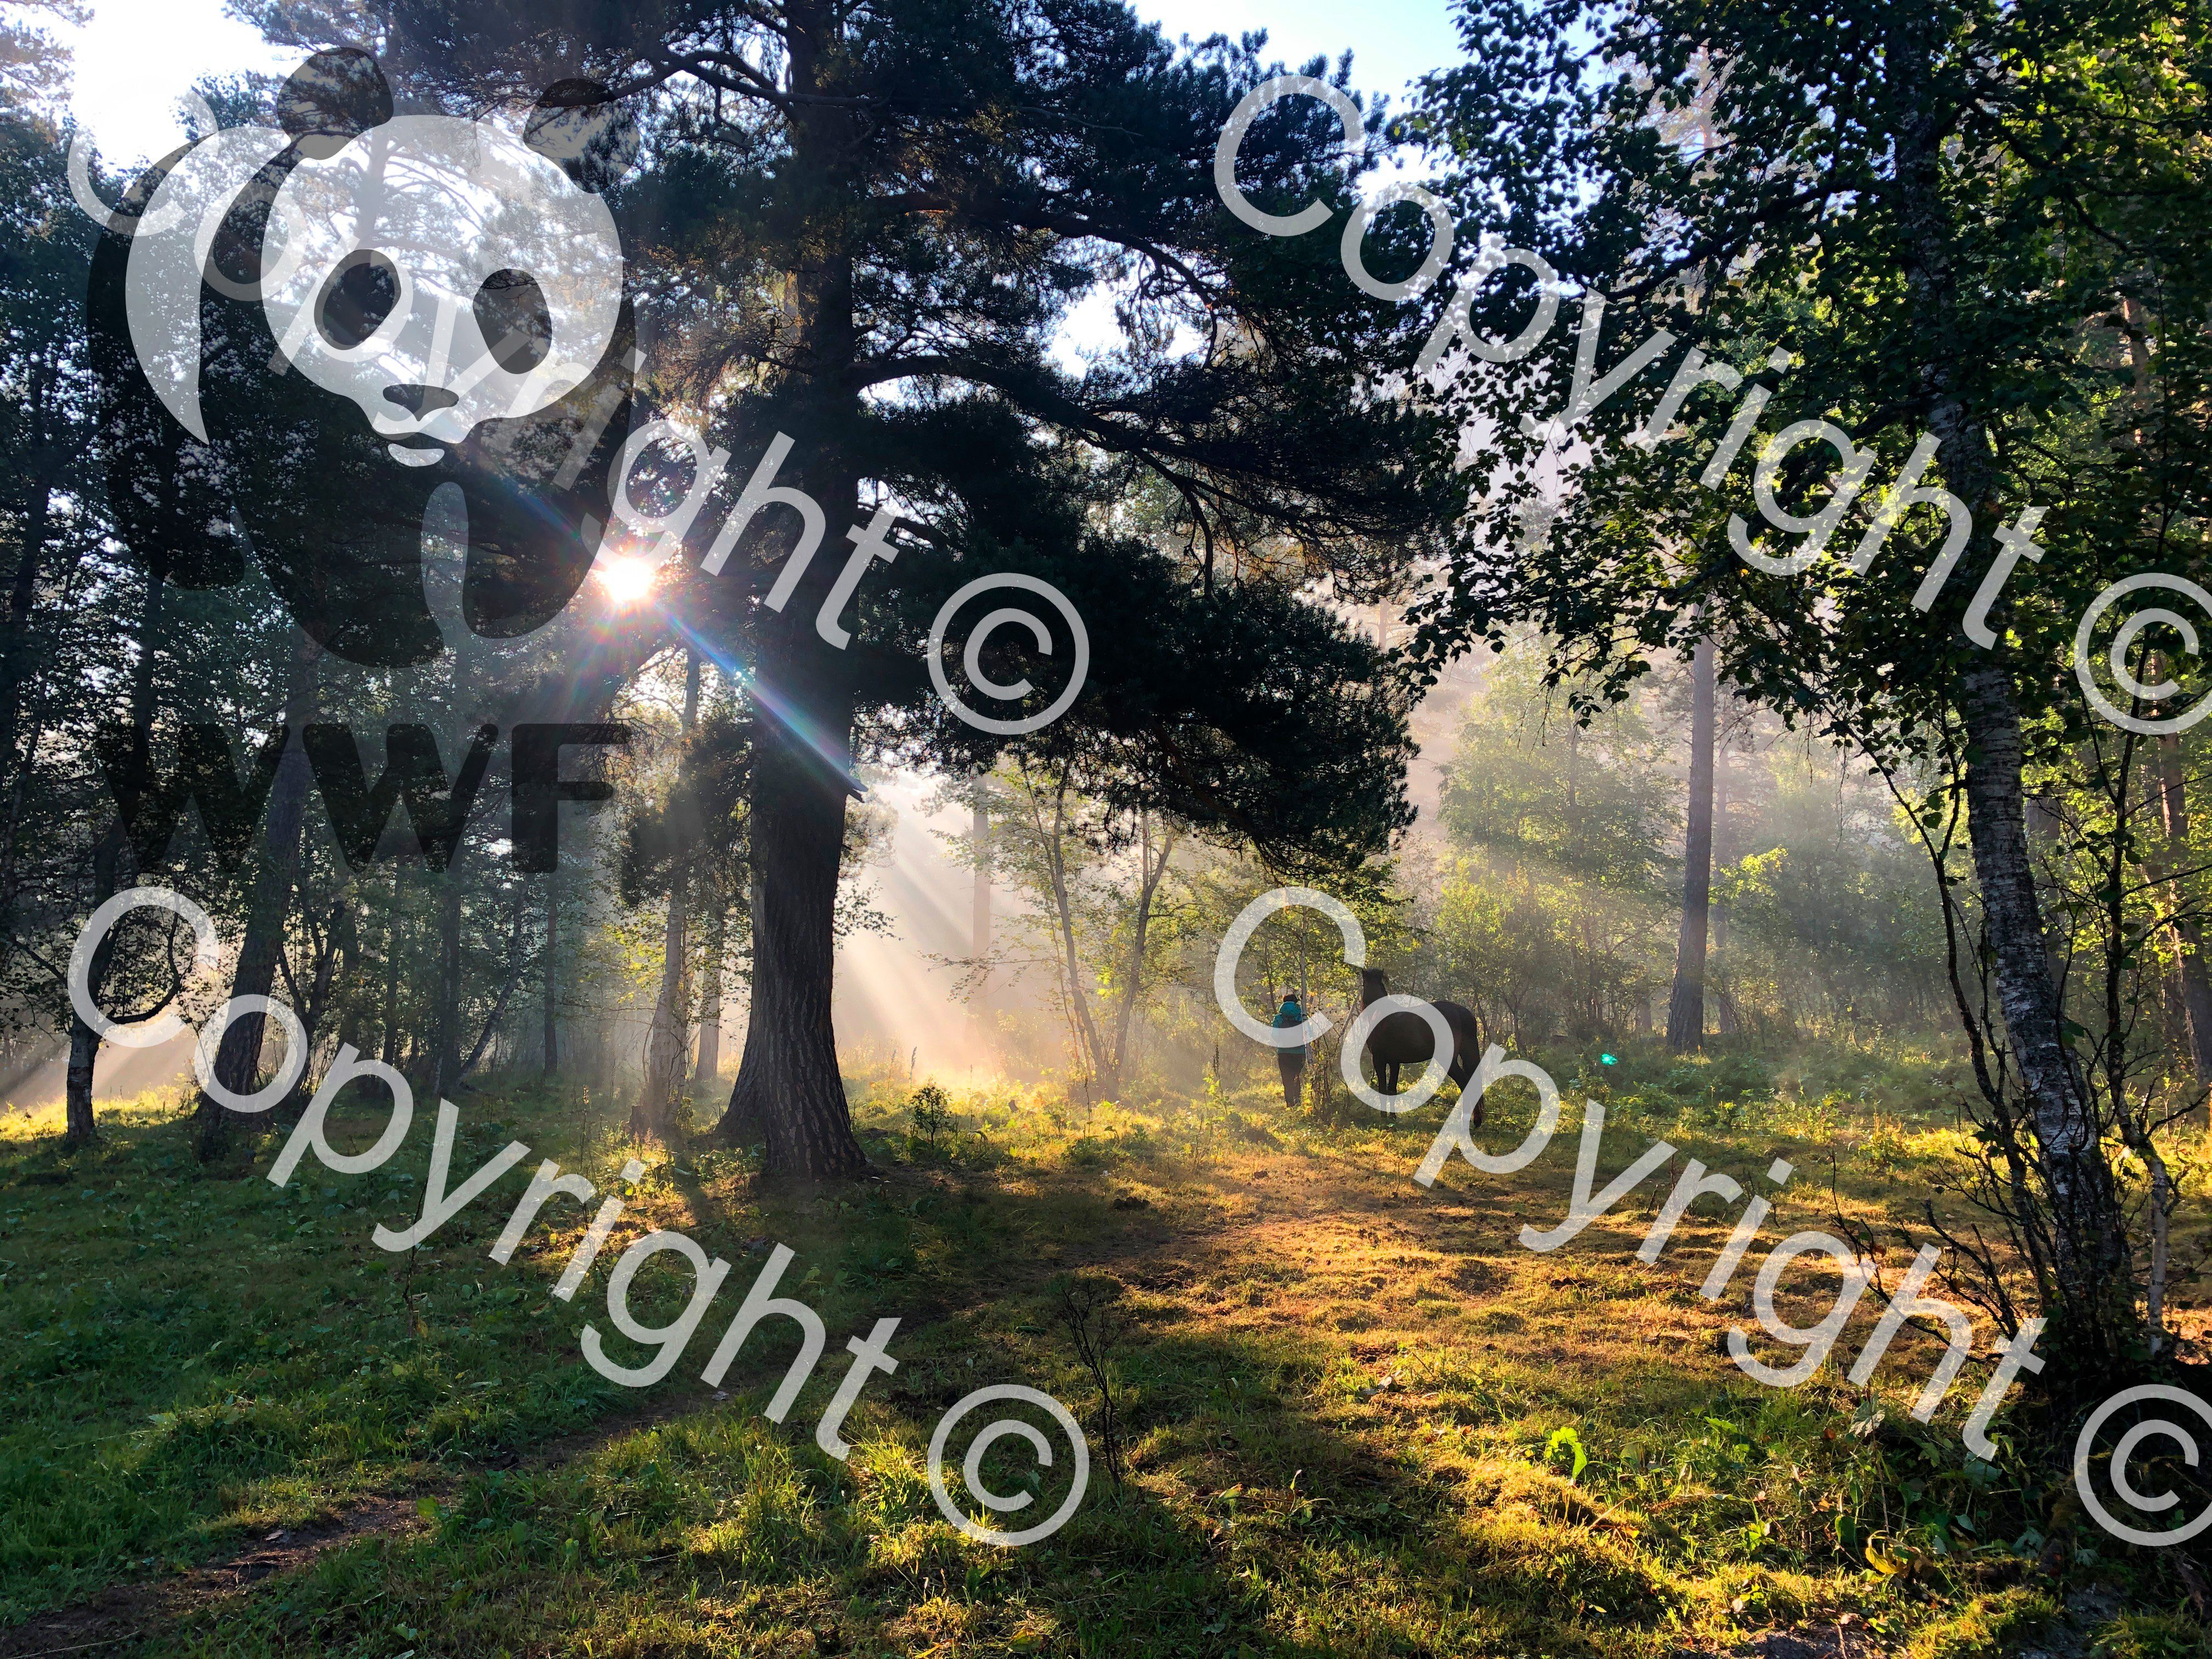 Add logo and text watermark to photo.